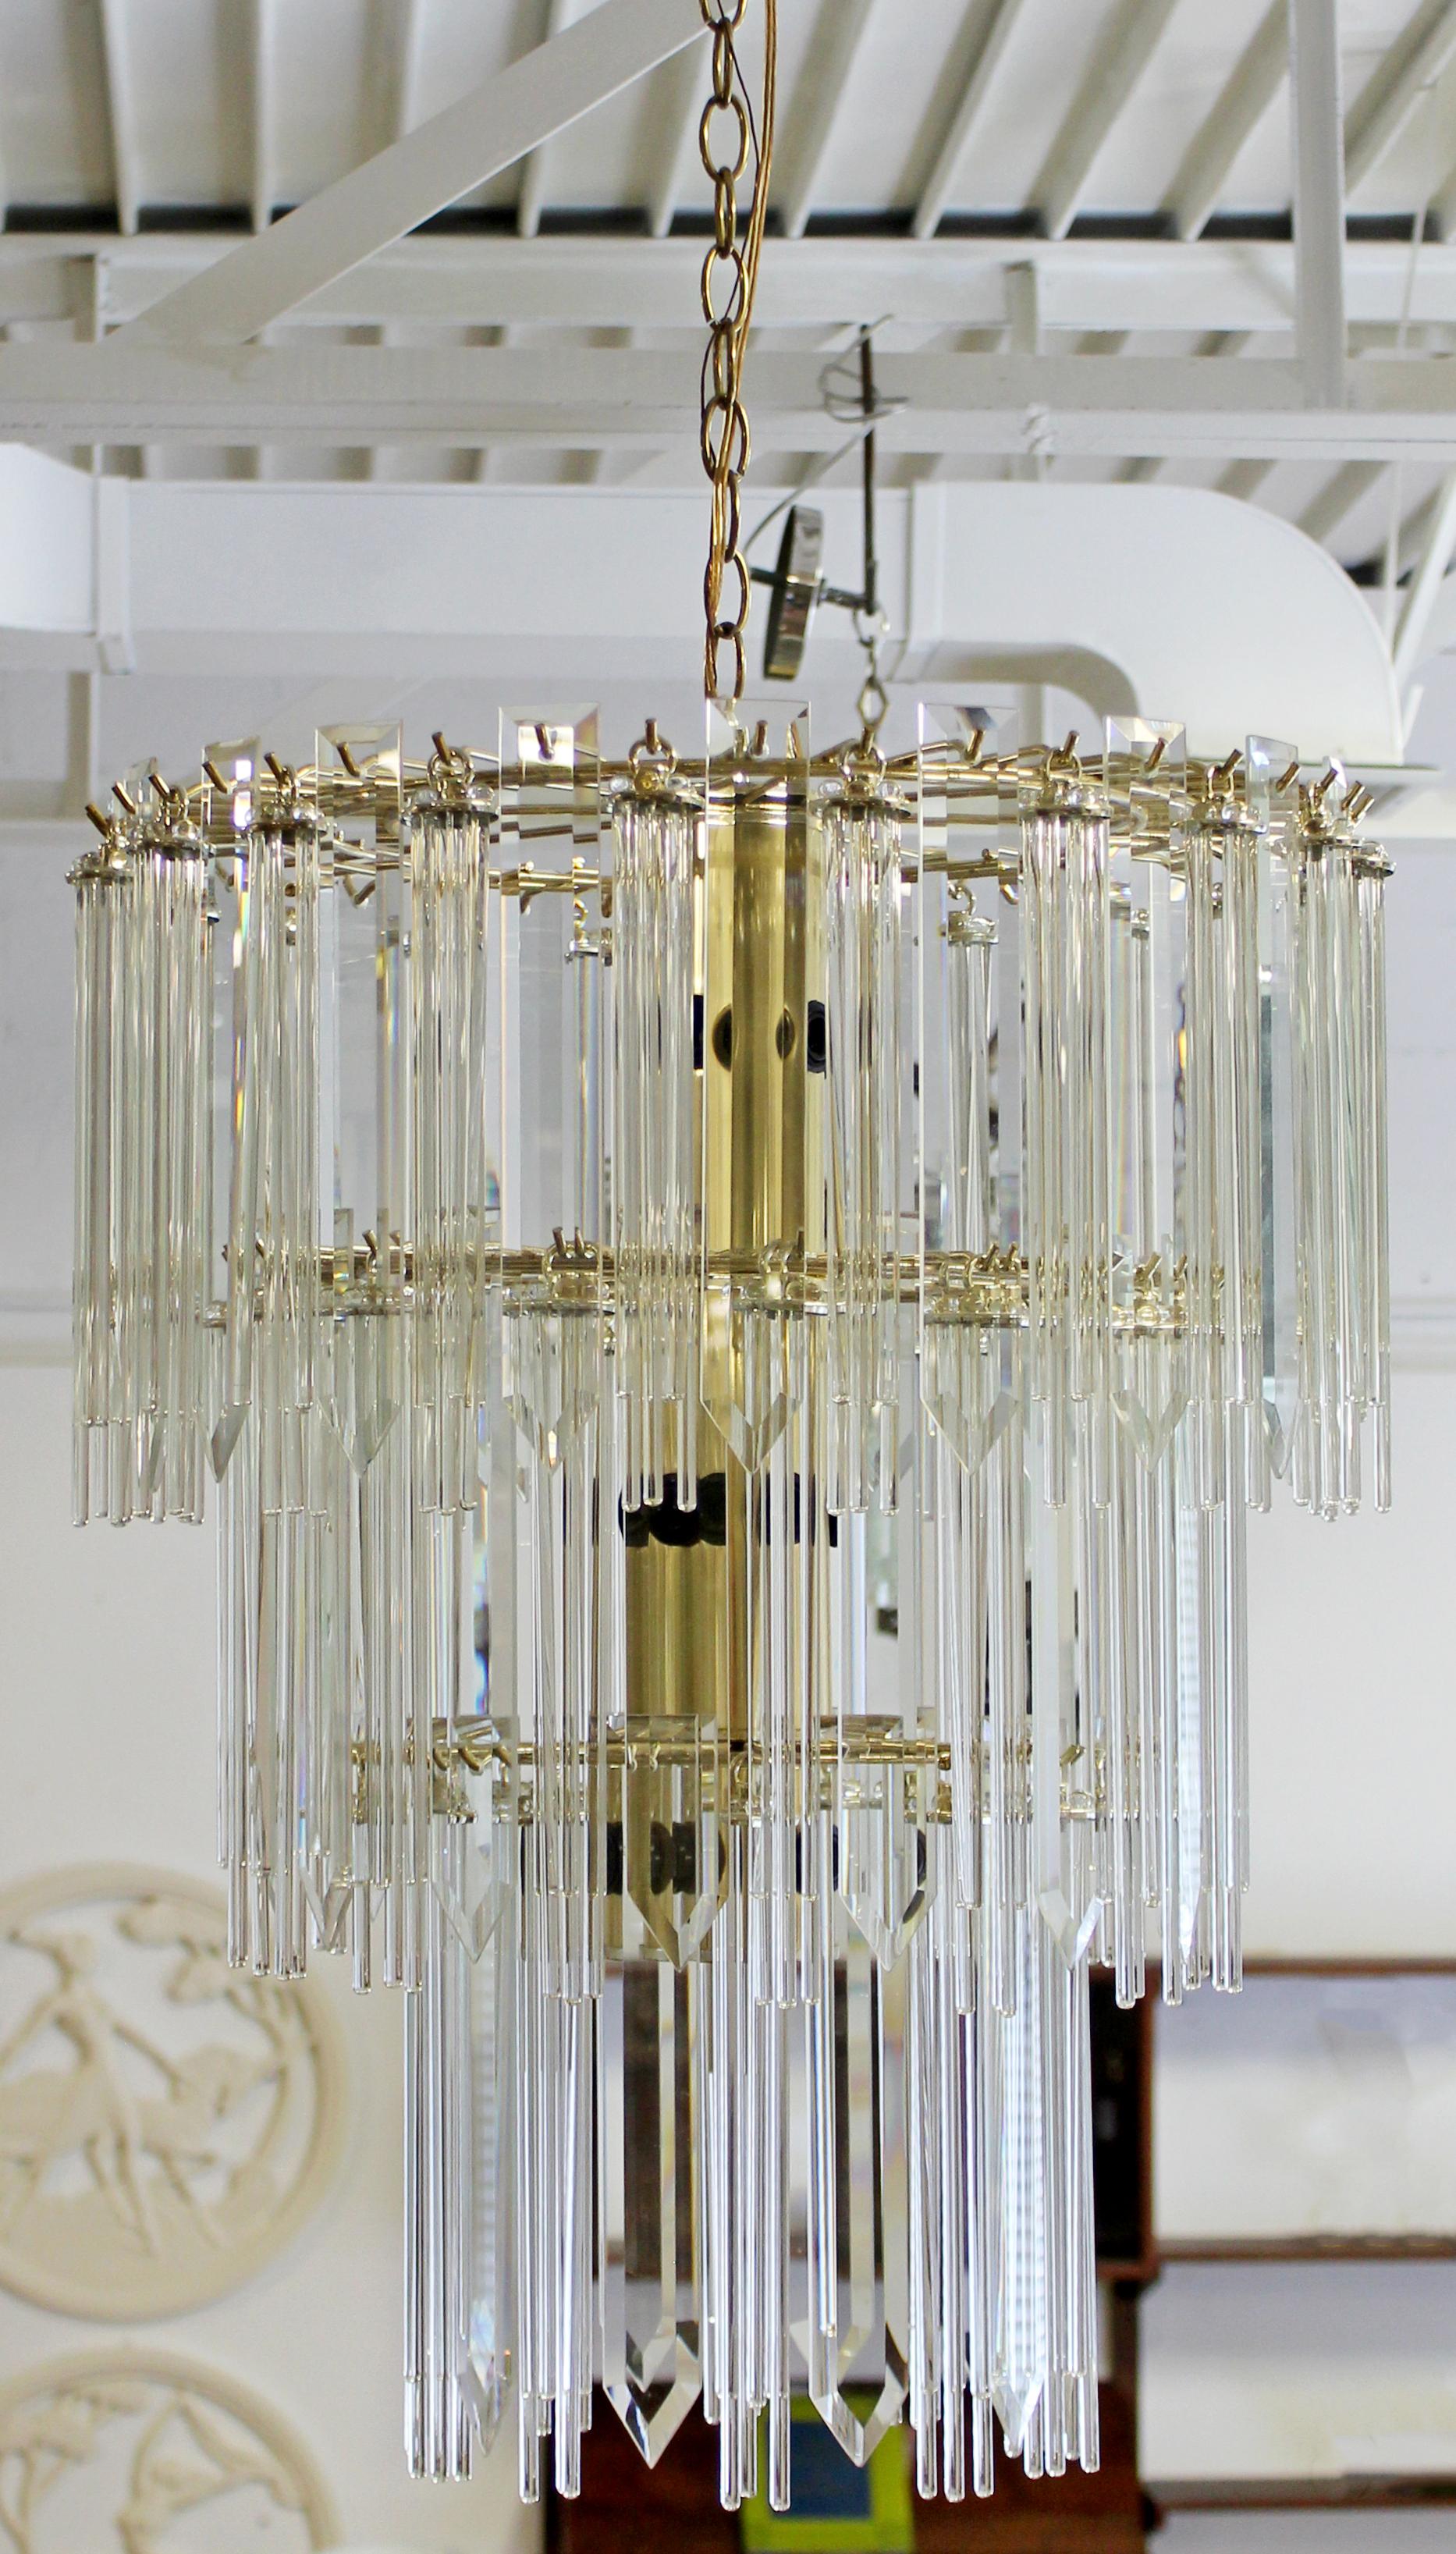 For your consideration is a spectacular, tiered Murano glass and brass chandelier, made in Italy, circa the 1970s. In excellent condition. The dimensions are 19